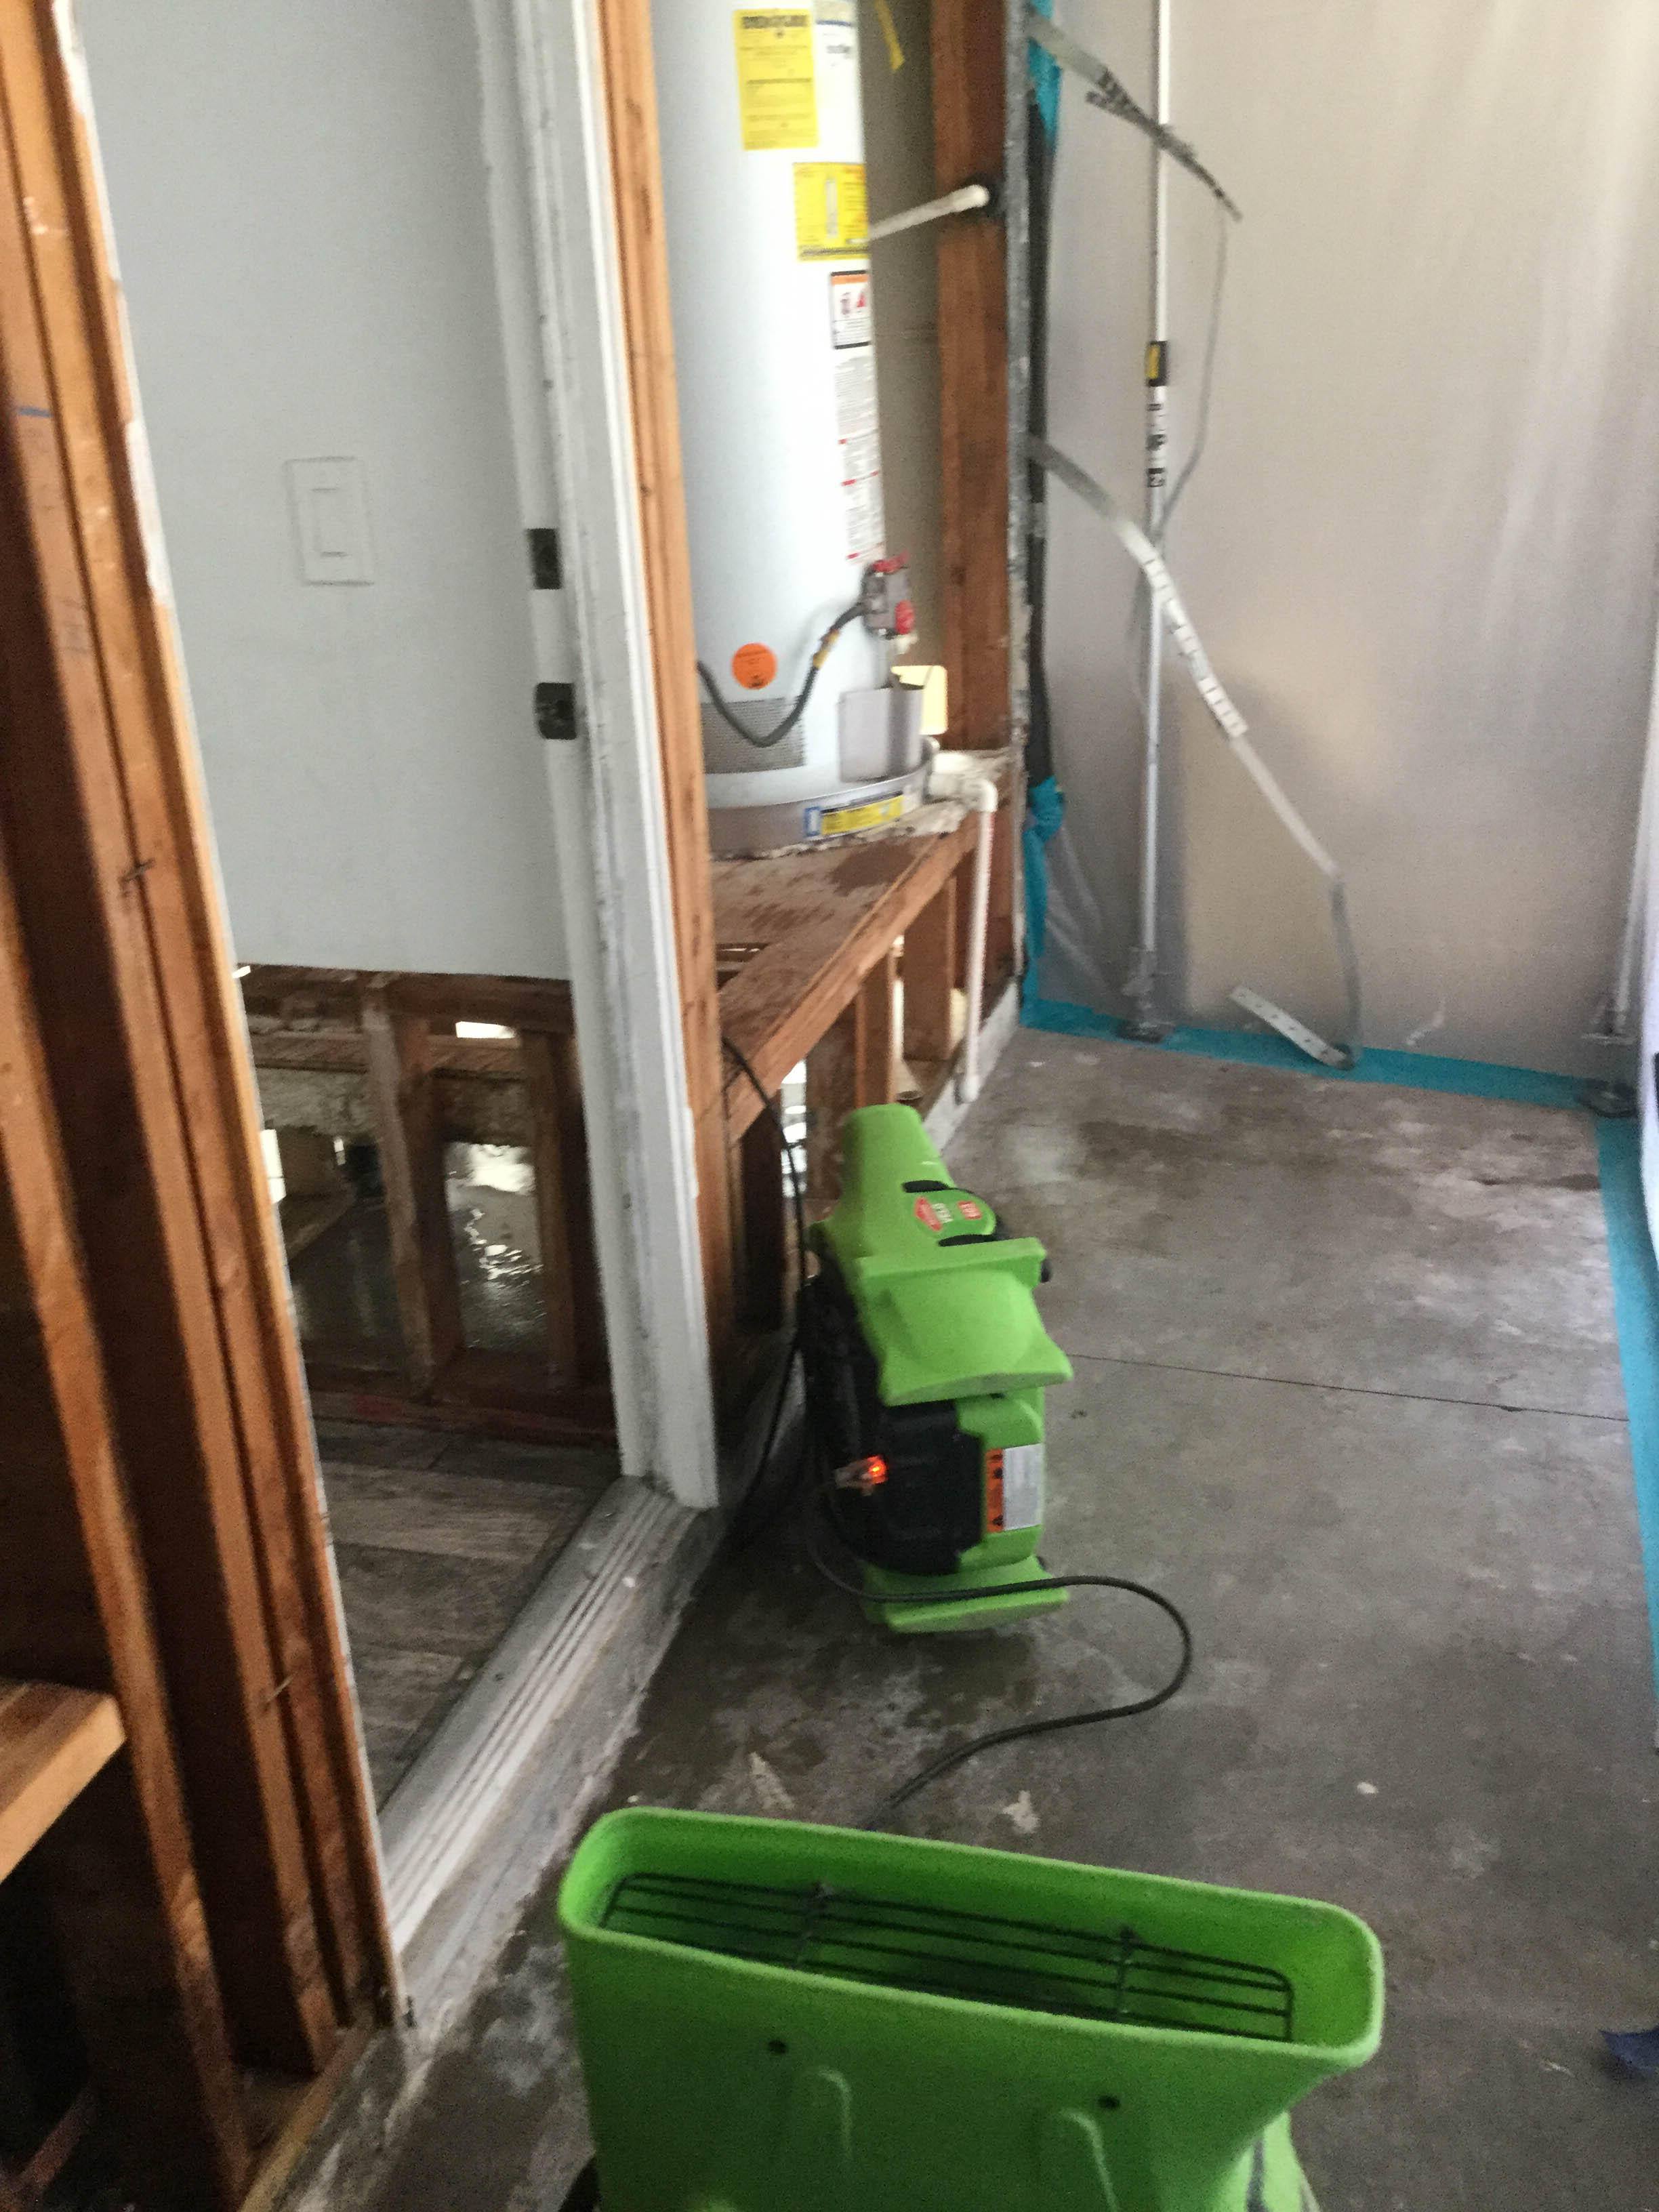 Our knowledge and expertise in the water restoration sector make us more than prepared to recover your house appropriately. We will work tirelessly to restore your home to its pre-damage state.